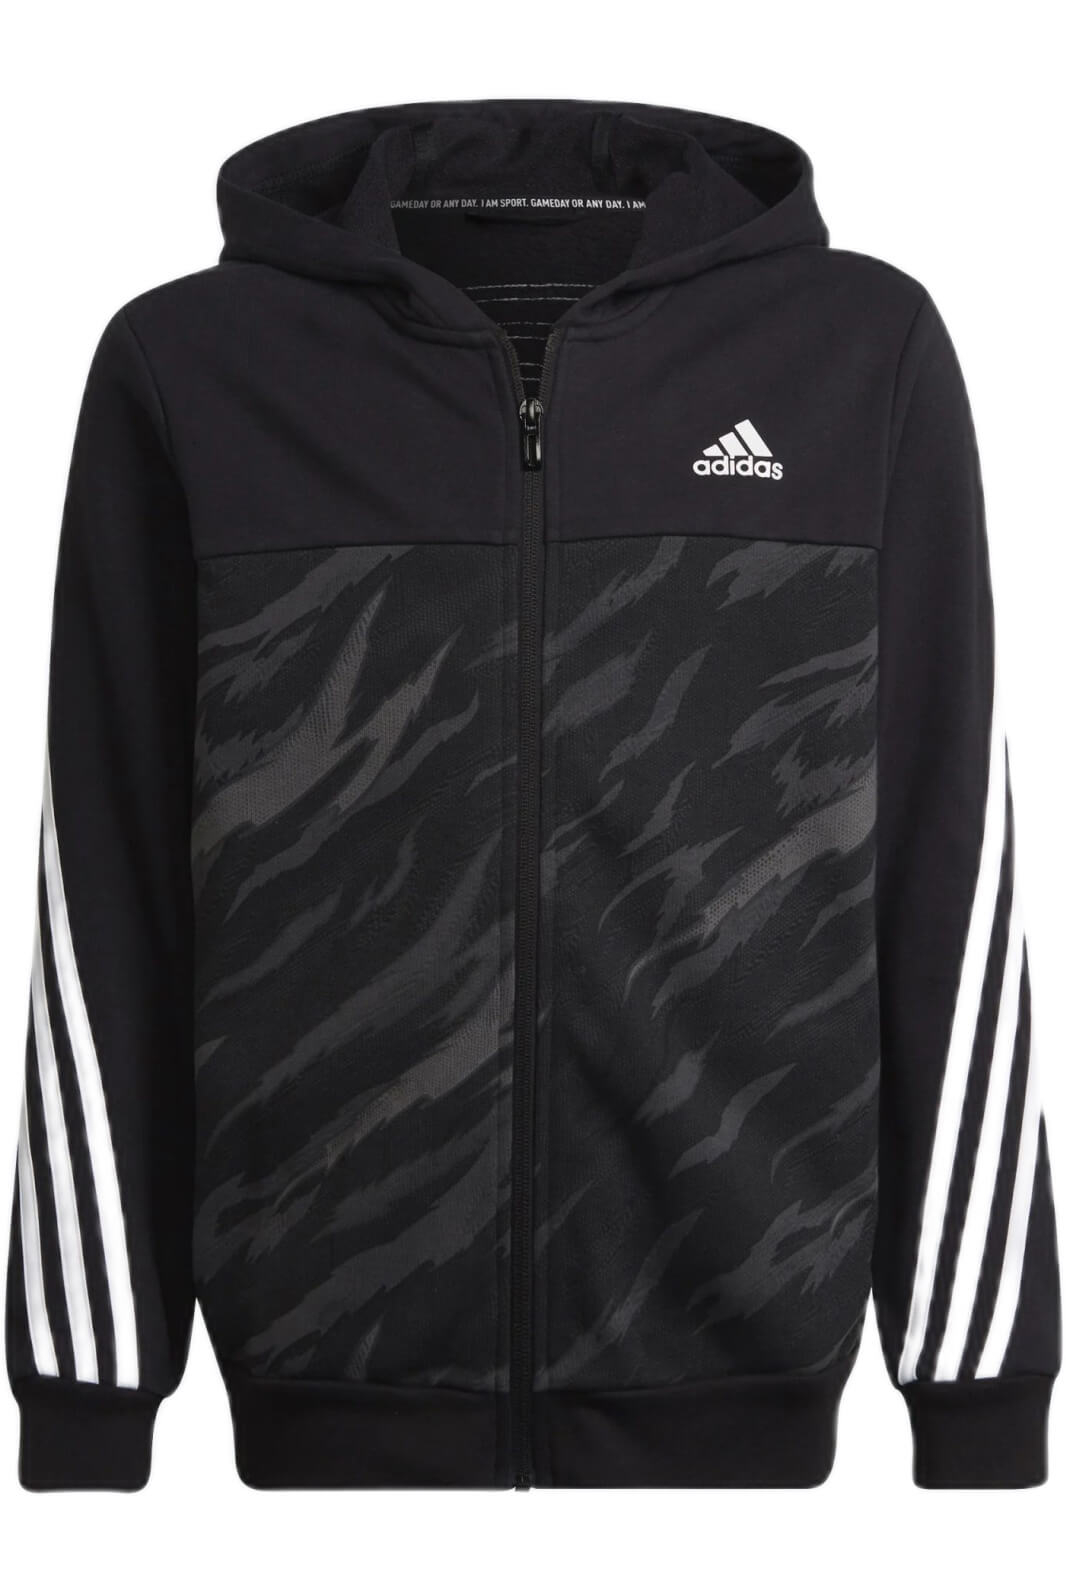 Adidas French Terry Colorblock -